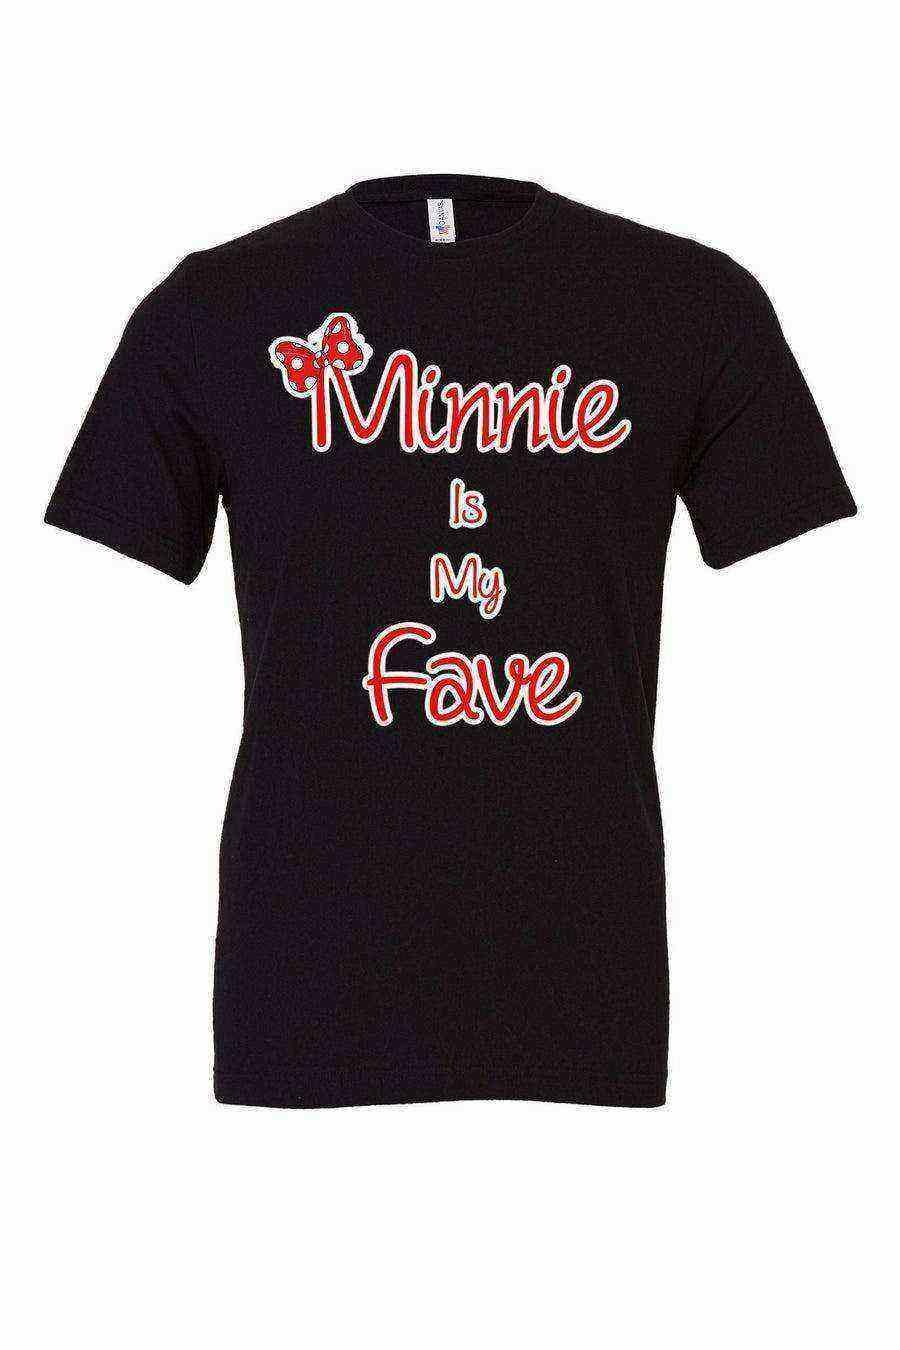 Toddler | Minnie is my Fave Shirt - Dylan's Tees